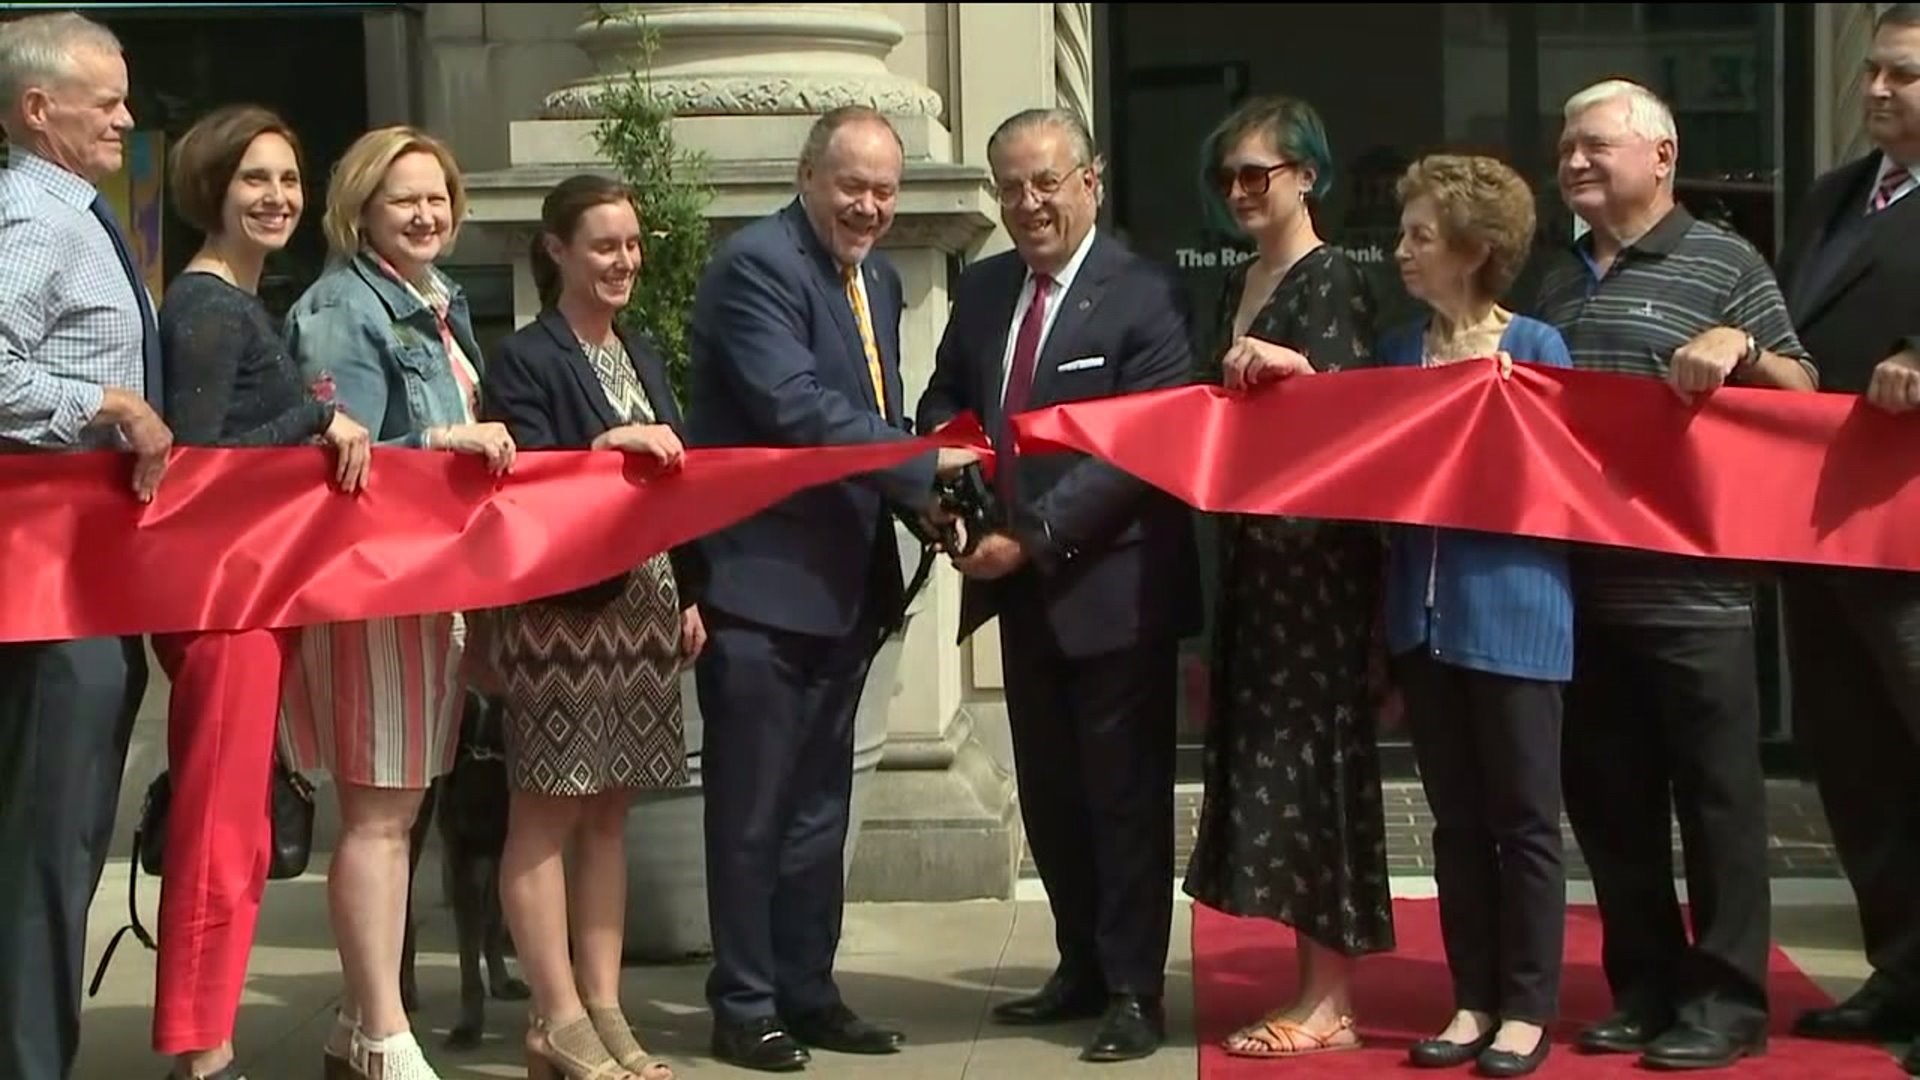 Ribbon Cutting at the Recovery Bank in Scranton